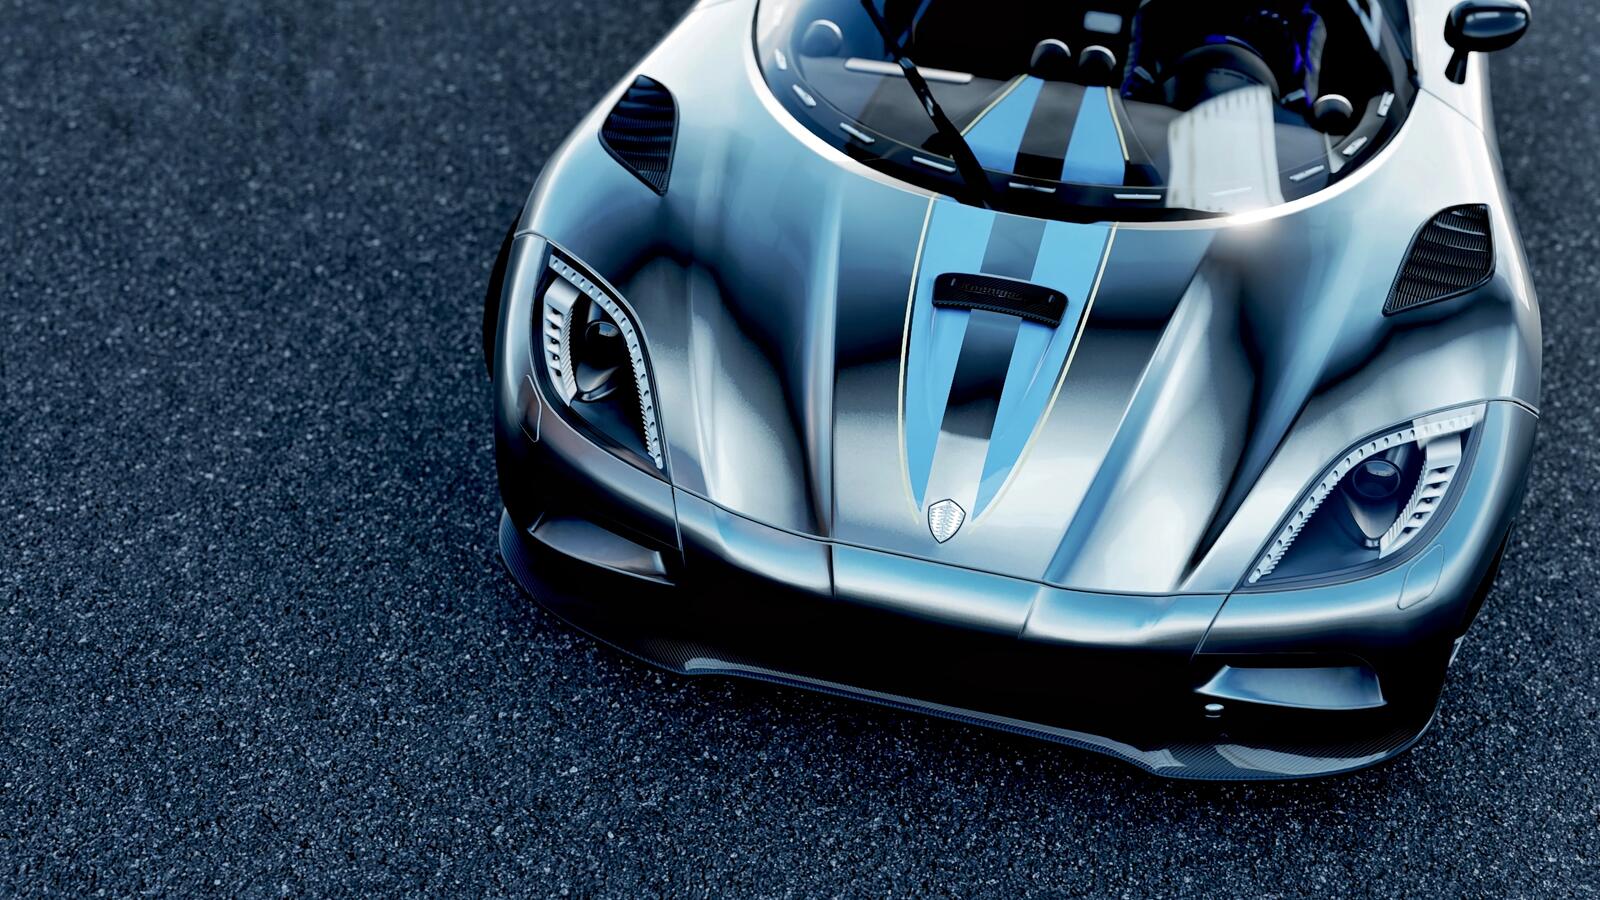 Wallpapers Koenigsegg Agera supercar view from front on the desktop